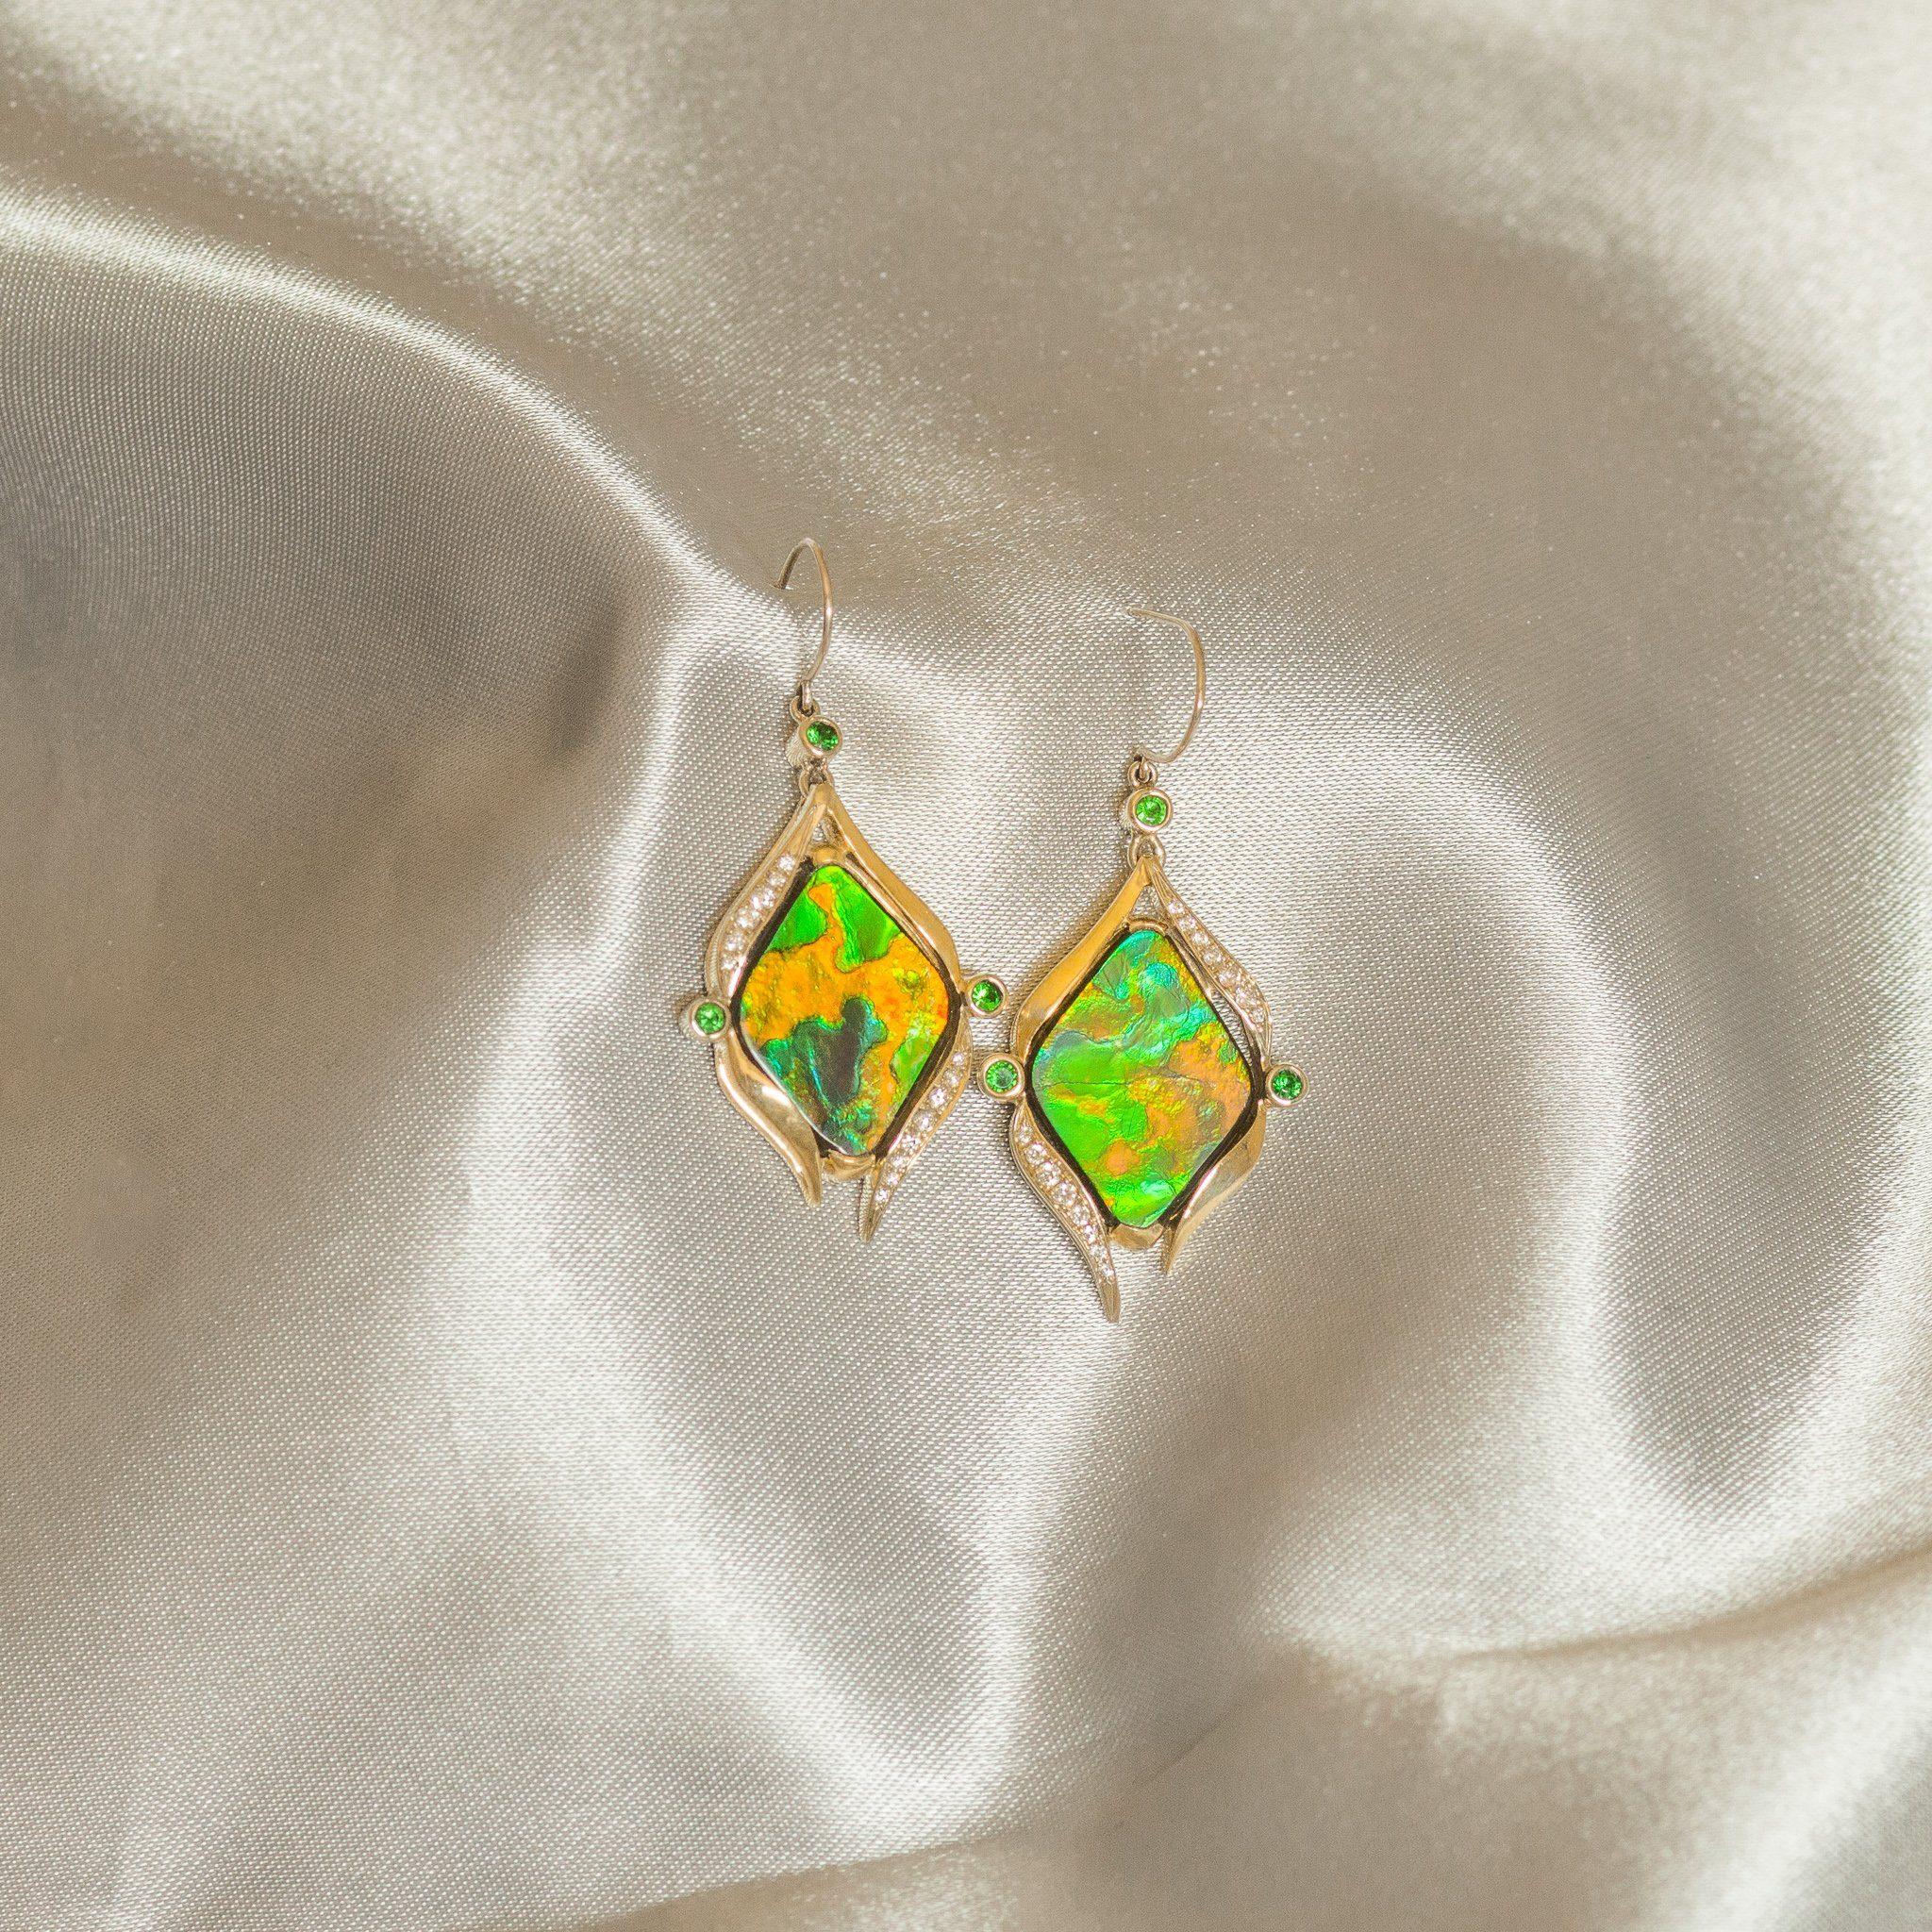 Mark Schneider designed, AA grade 6.5CT freeform Ammolite set in 14K gold accented with 0.24CT tsavorites and 0.27CT diamonds. These one-of-a-kind earrings feature exquisite naturally stabilized Ammolite gemstones. These natural freeform Ammolite